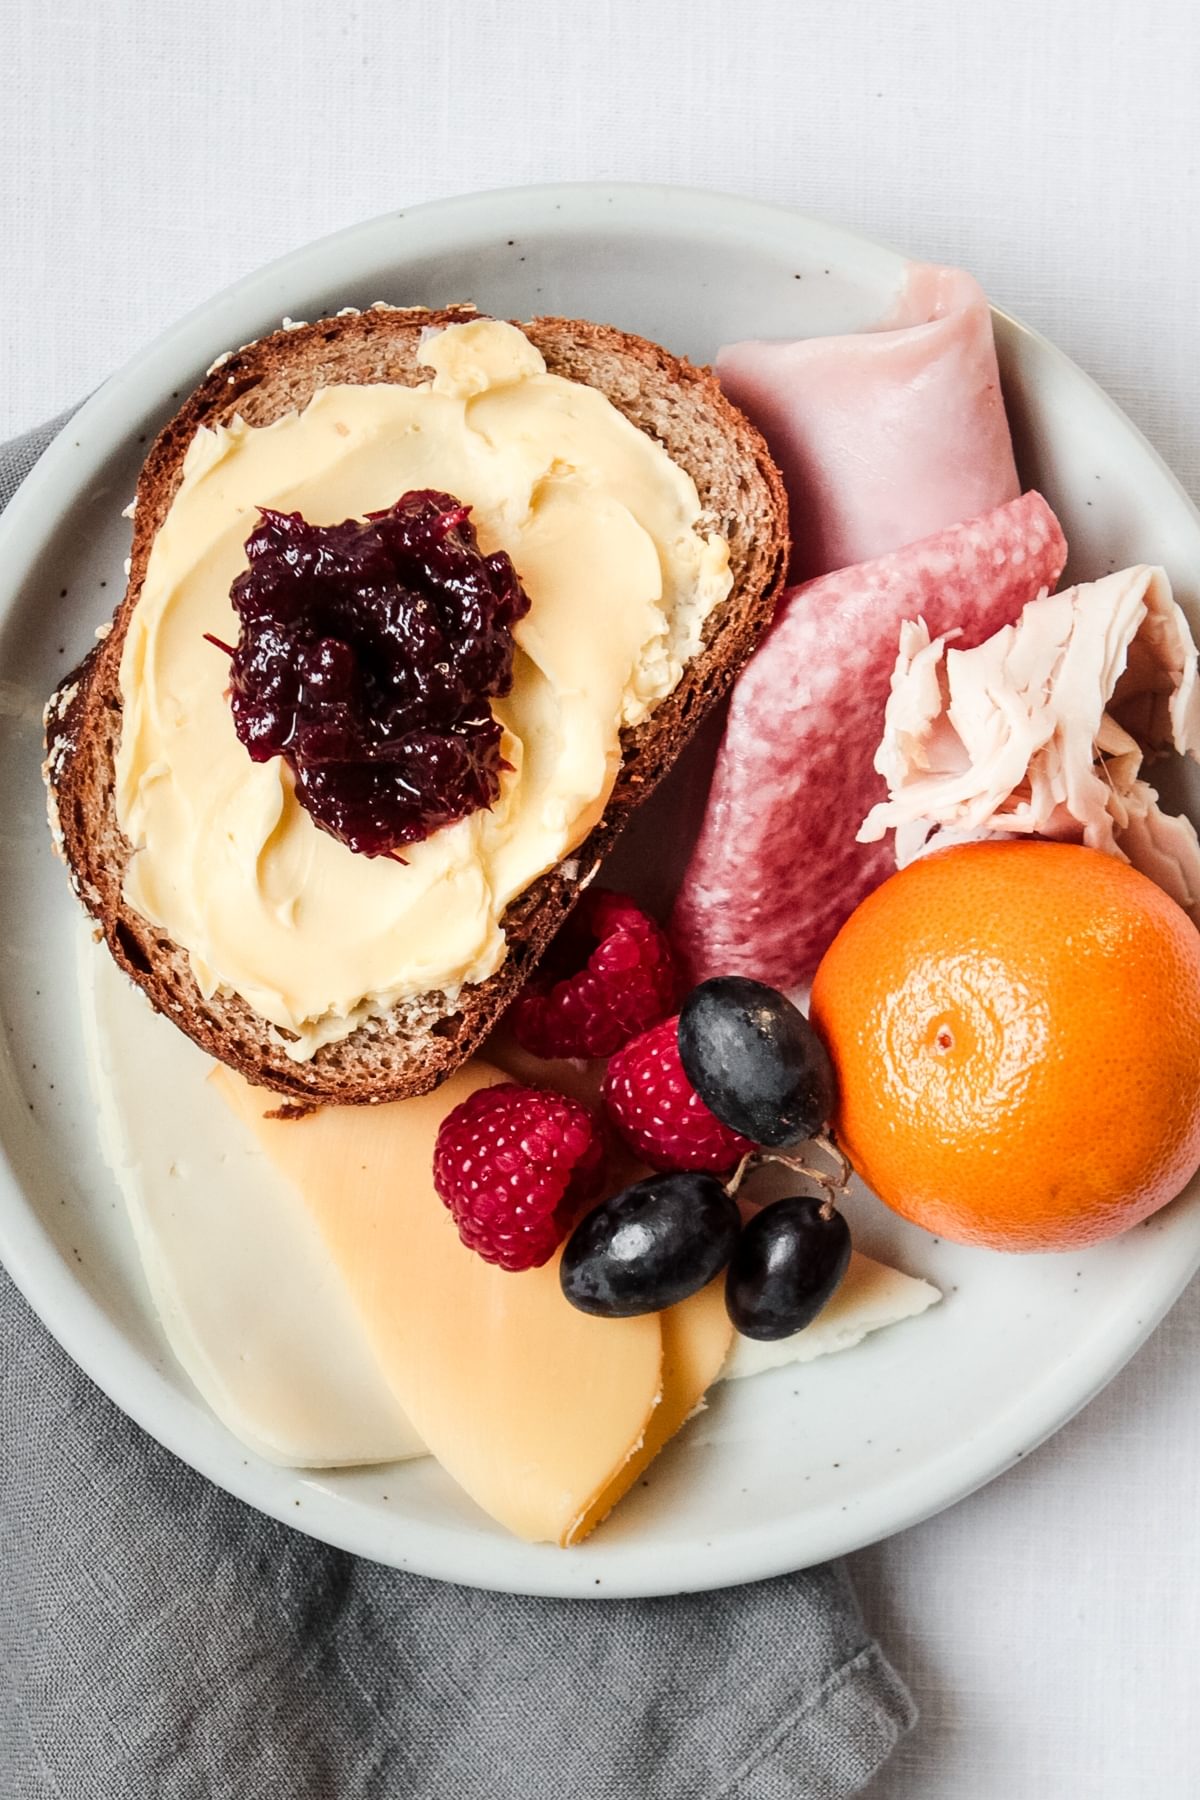 plate of bread with butter and jam, fresh fruit, cold cut meats and and mild cheeses